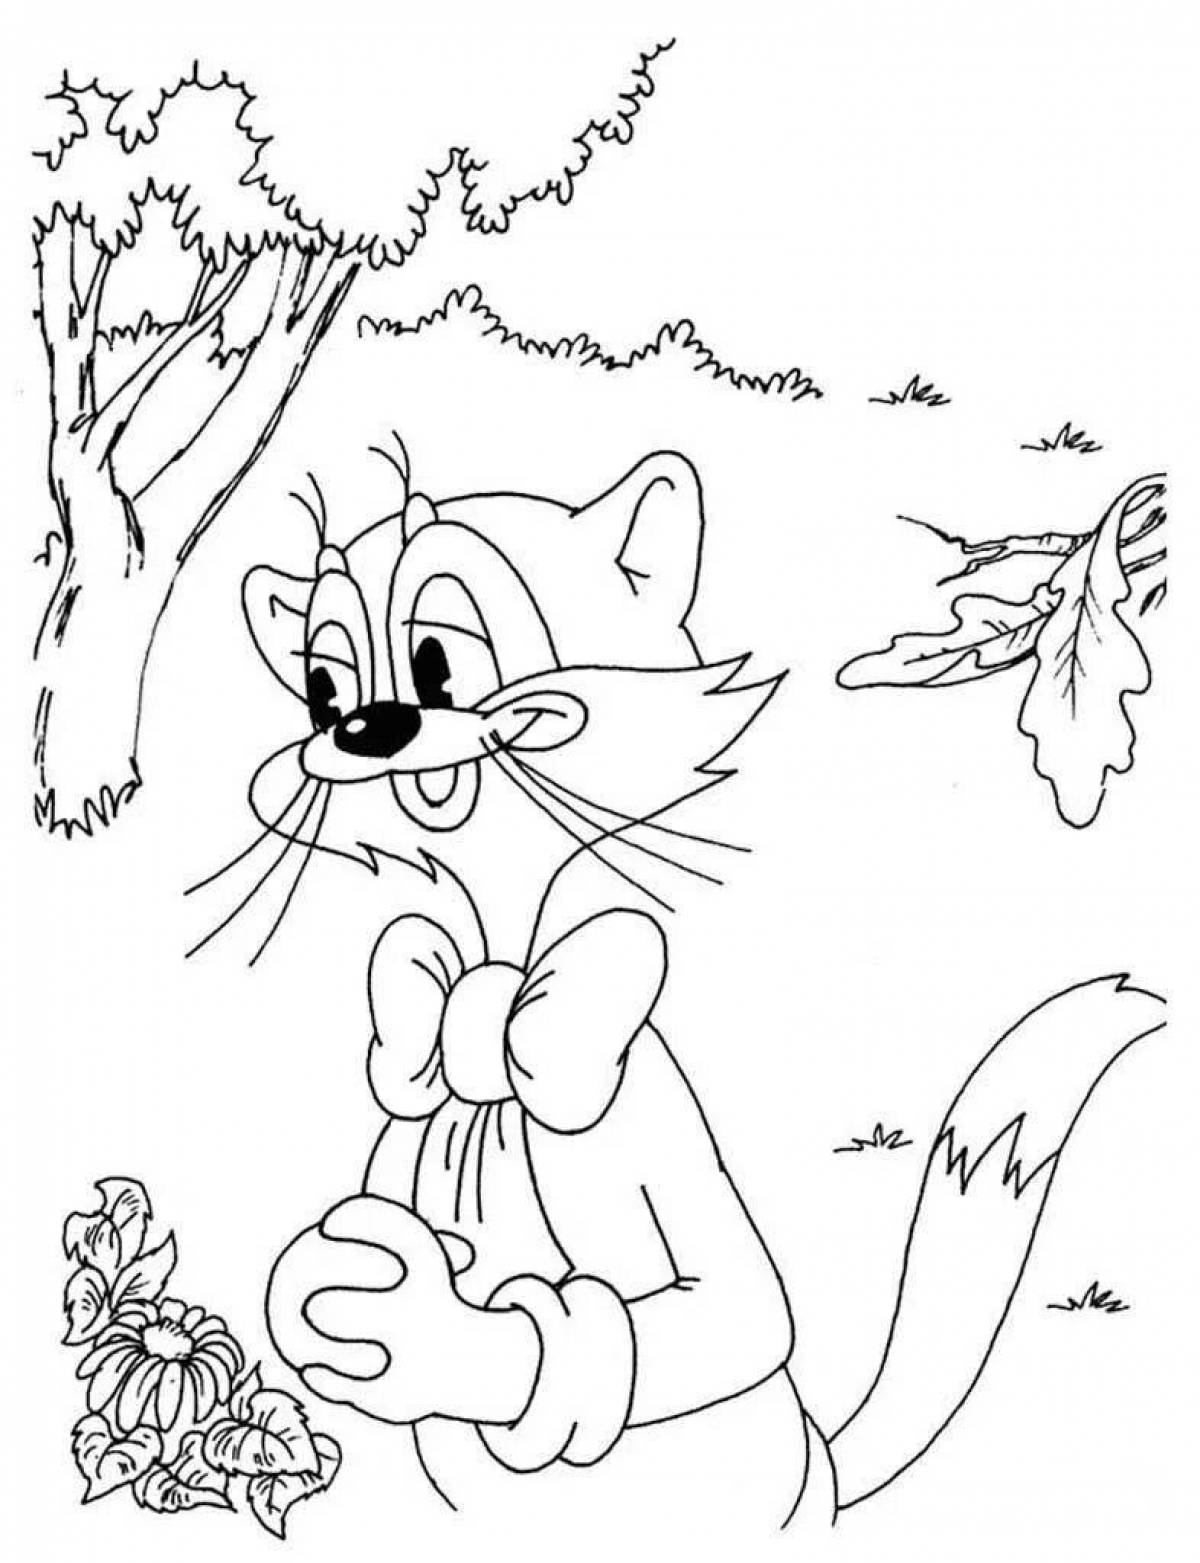 Coloring page gorgeous cat leopold